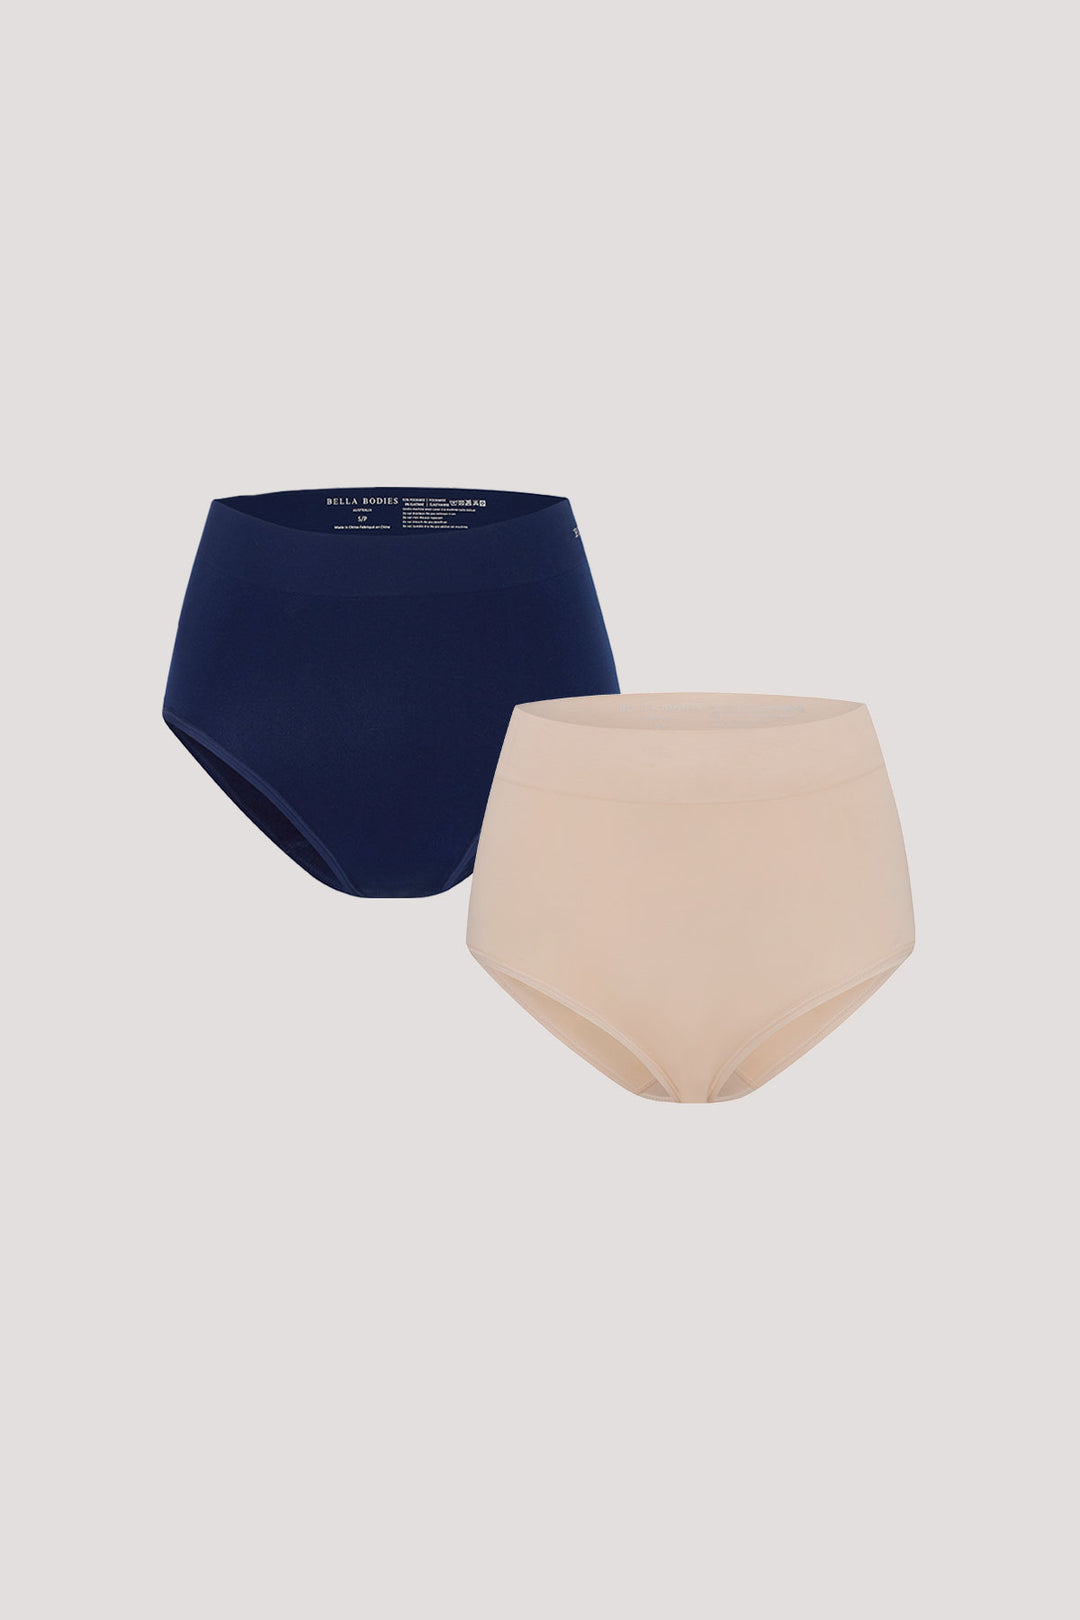 Travel Knickers, Full Cover Women's Knickers